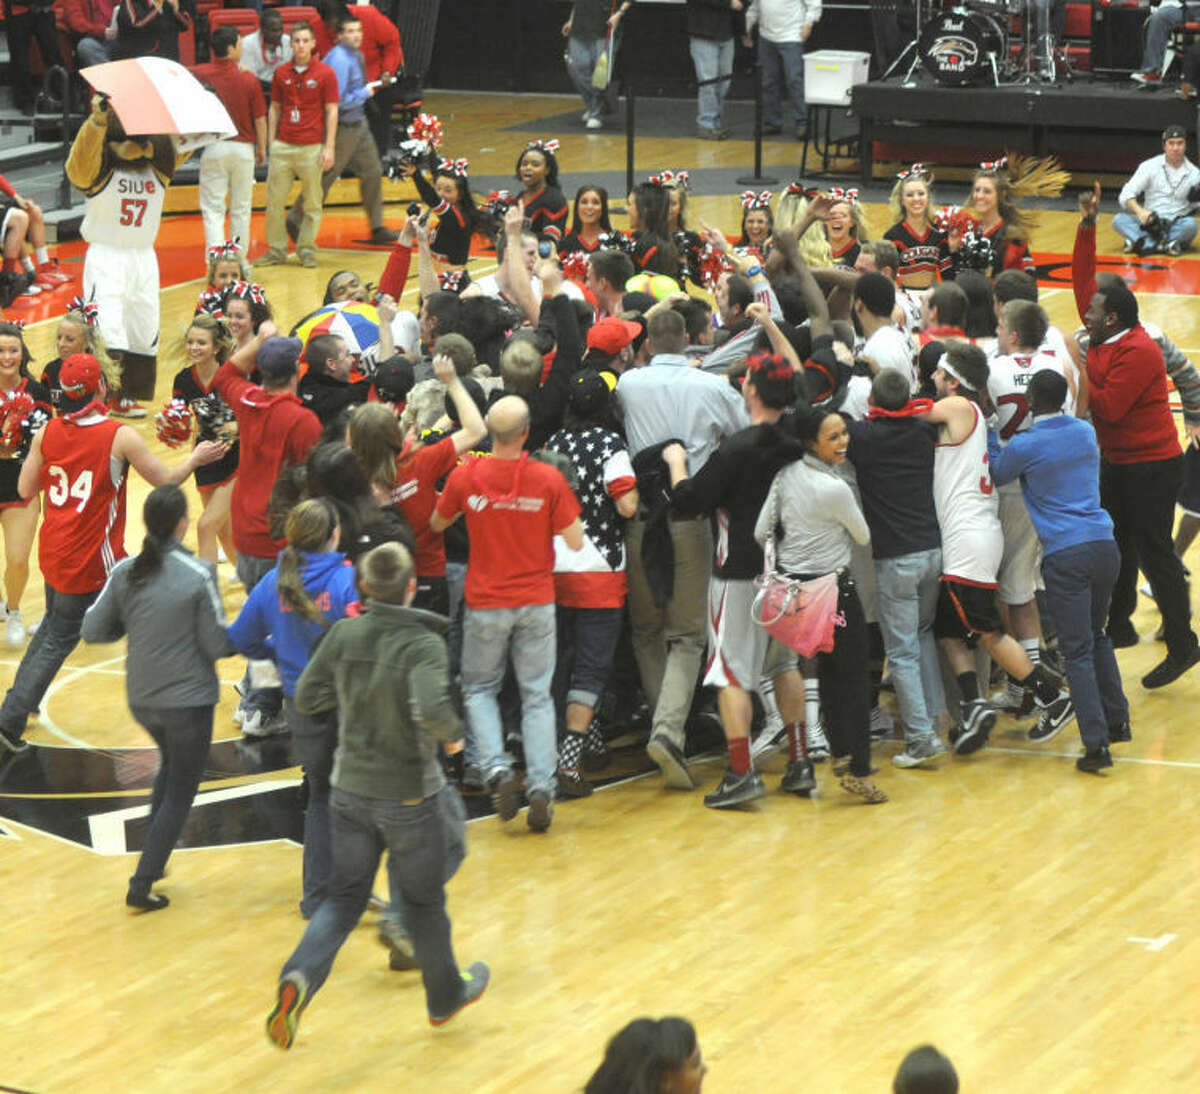 Cougar fans rush the floor after SIUE shocks the Racers in a 65-60 win.